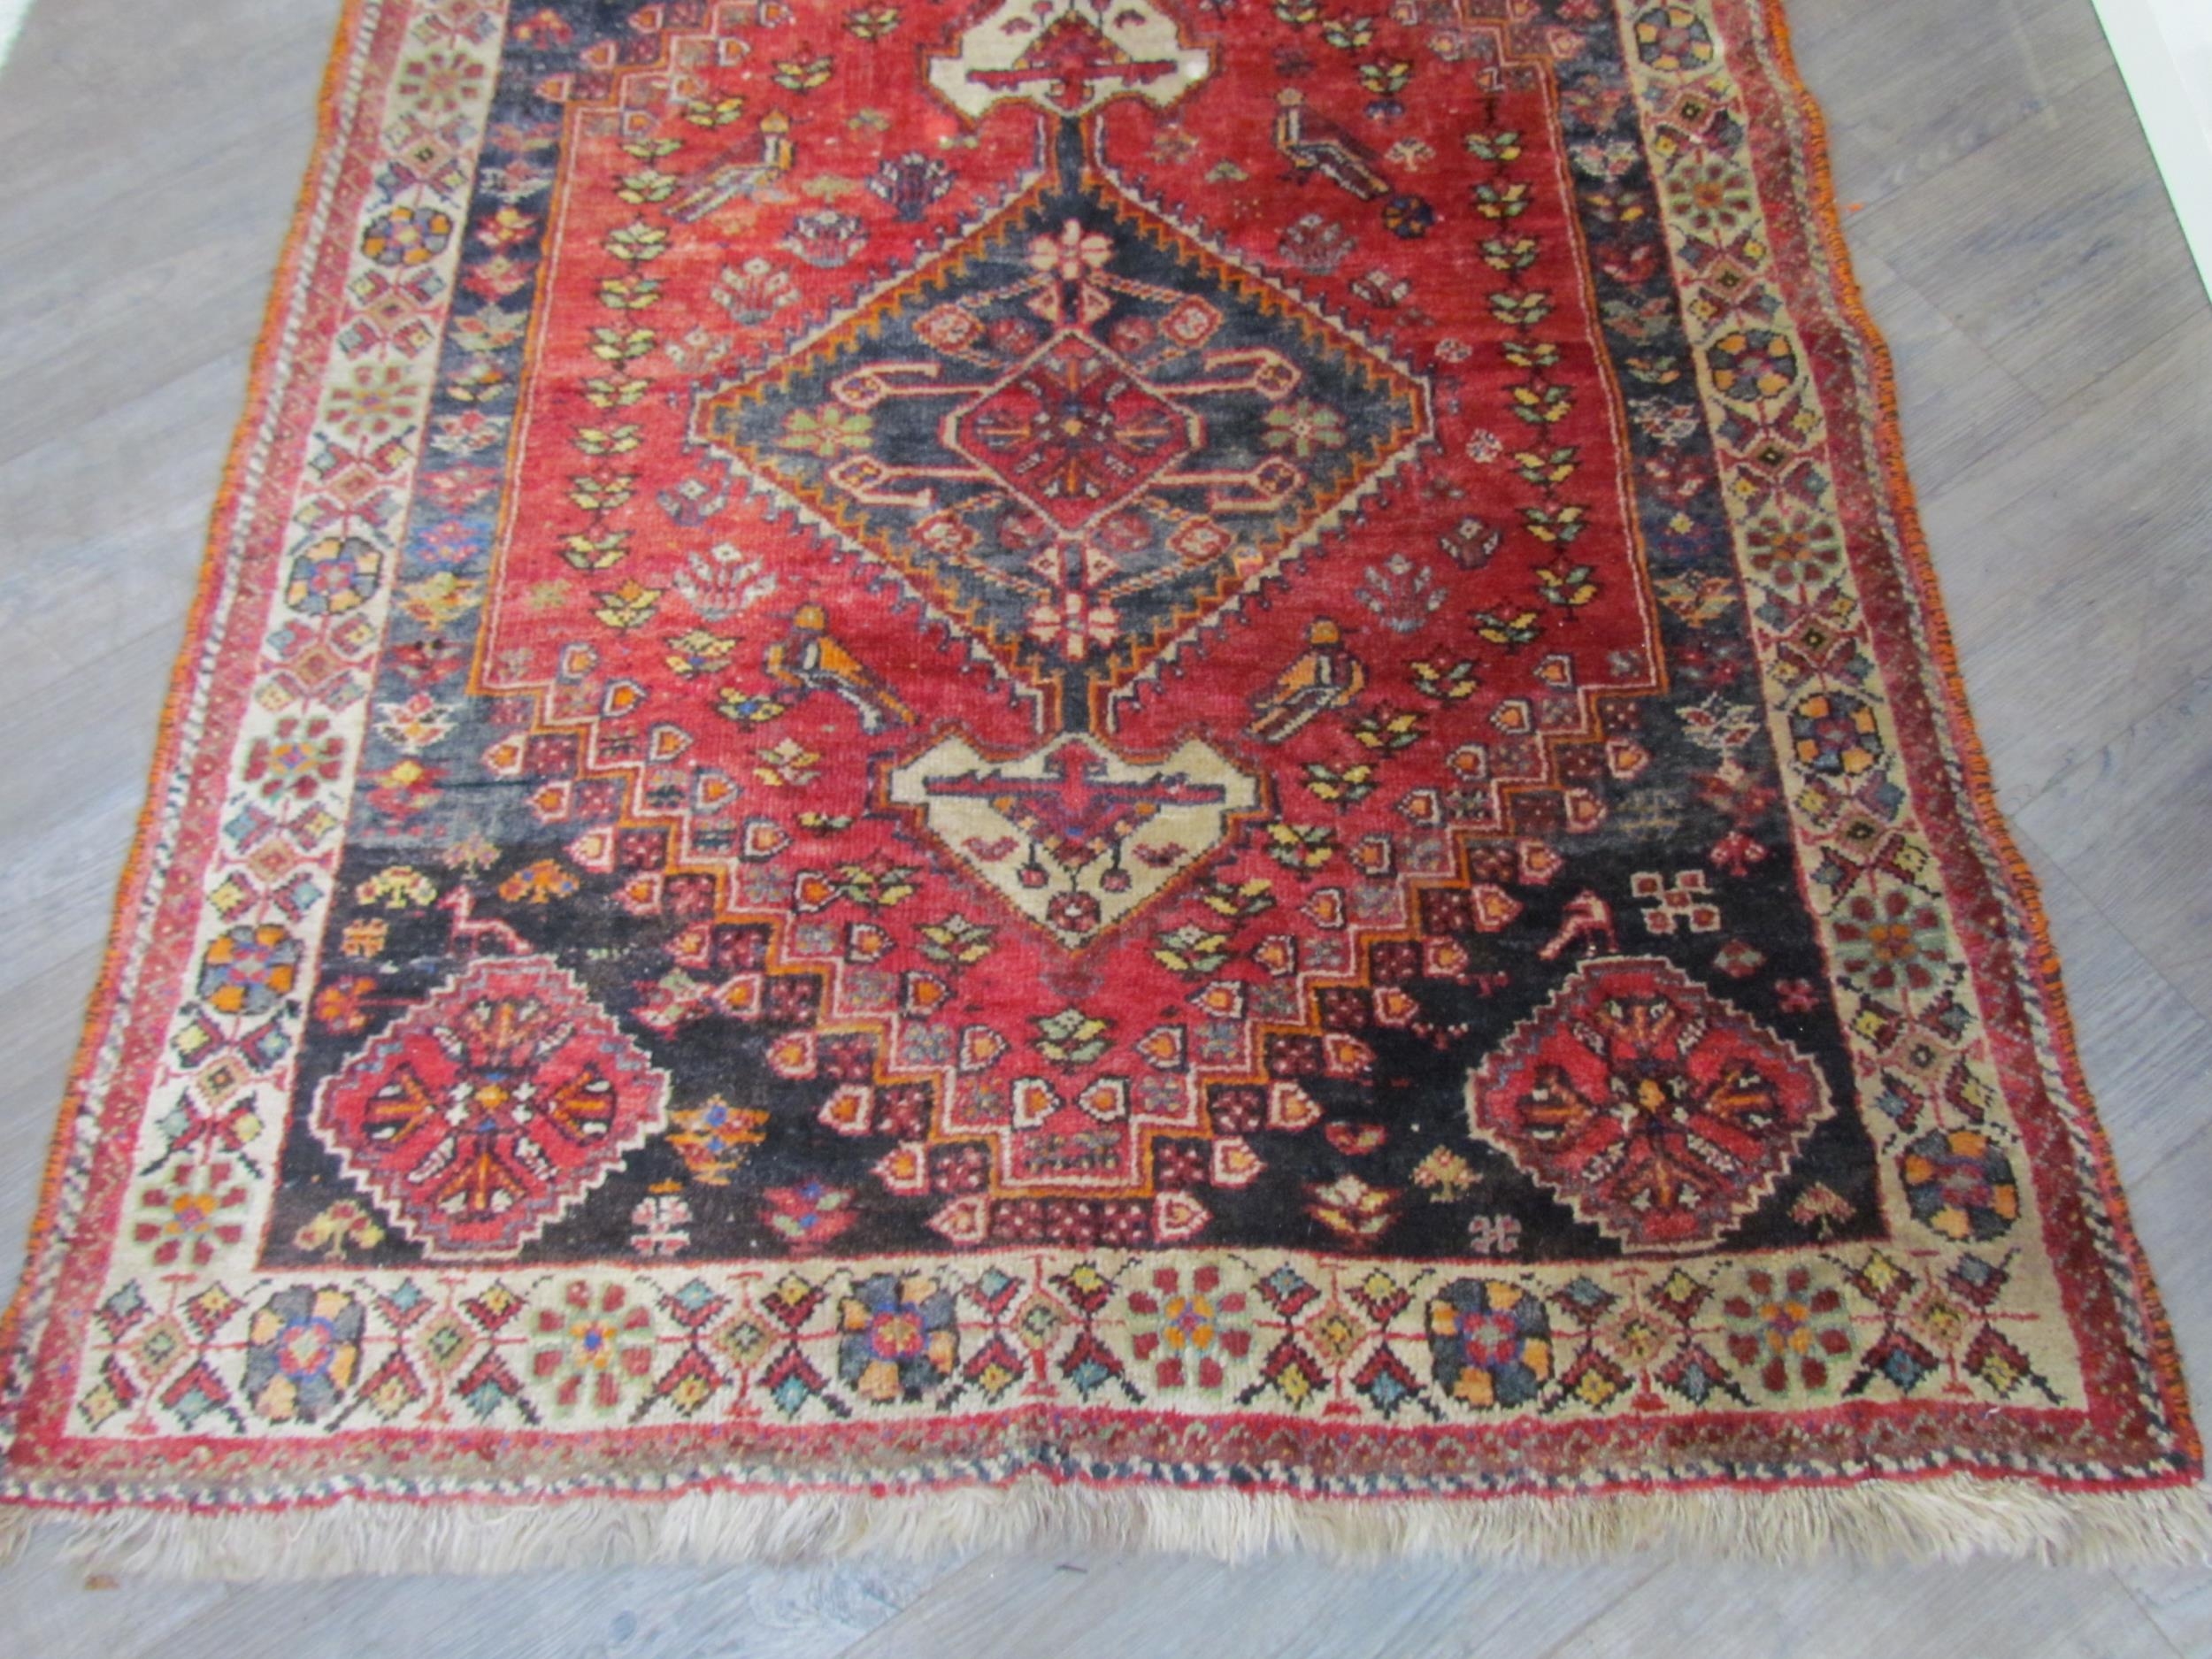 A Persian hand knotted wool rug, red ground with birds and floral borders, 155cm x 115cm - Image 2 of 7